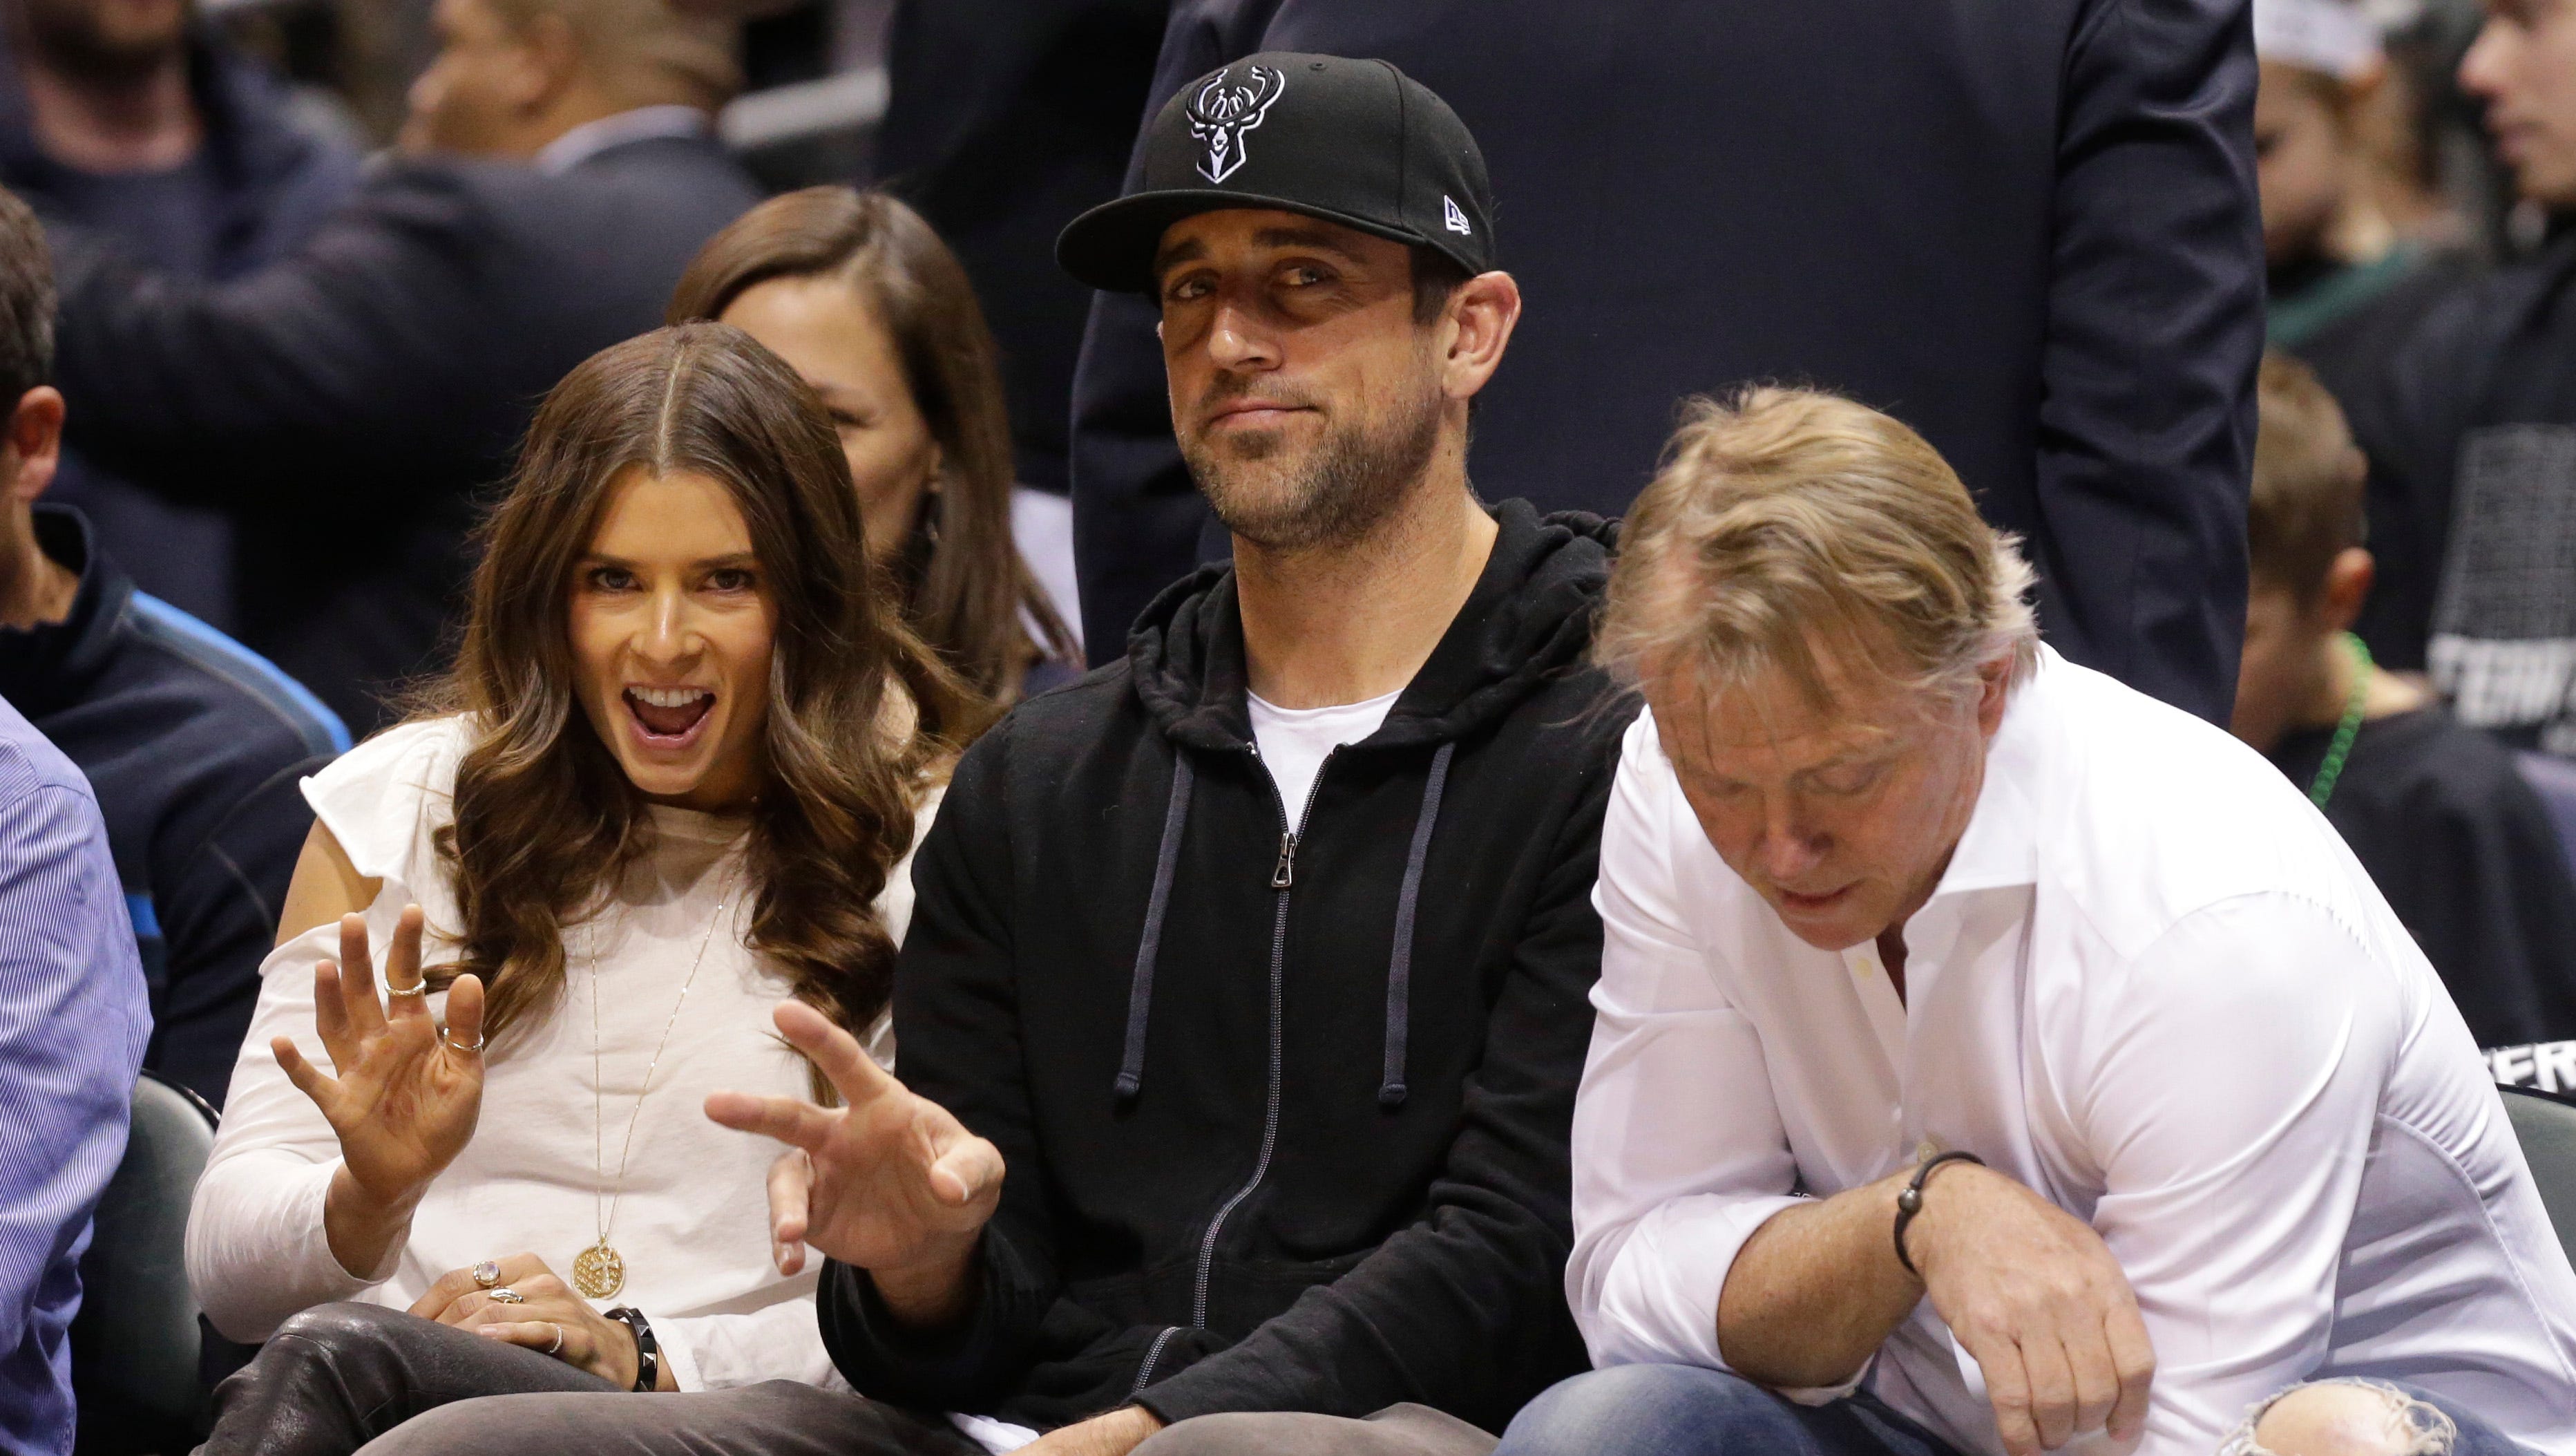 Danica Patrick and Aaron Rodgers look on during Game 3 of the first-round playoff series between the Bucks and Celtics at the BMO Harris Bradley Center in Milwaukee on Friday night. Next to Rodgers is Bucks co-owner Wes Edens.